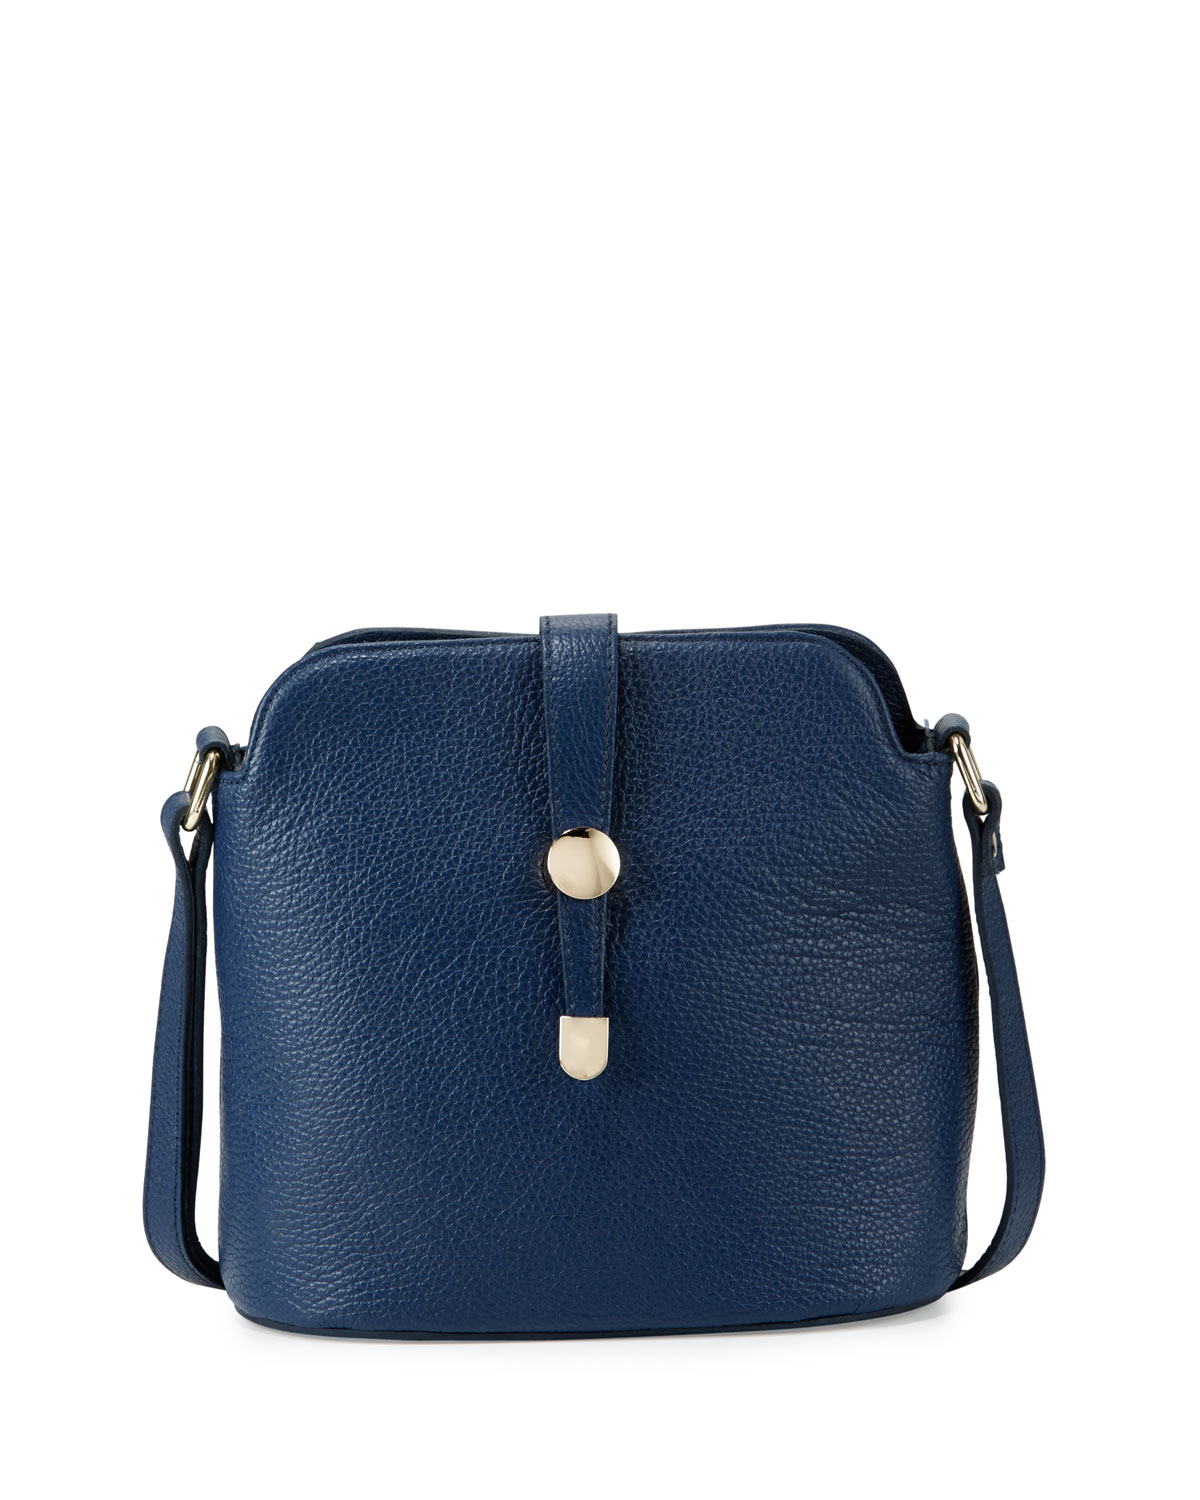 Lyst - Neiman Marcus Framed Dome Leather Crossbody Bag in Blue